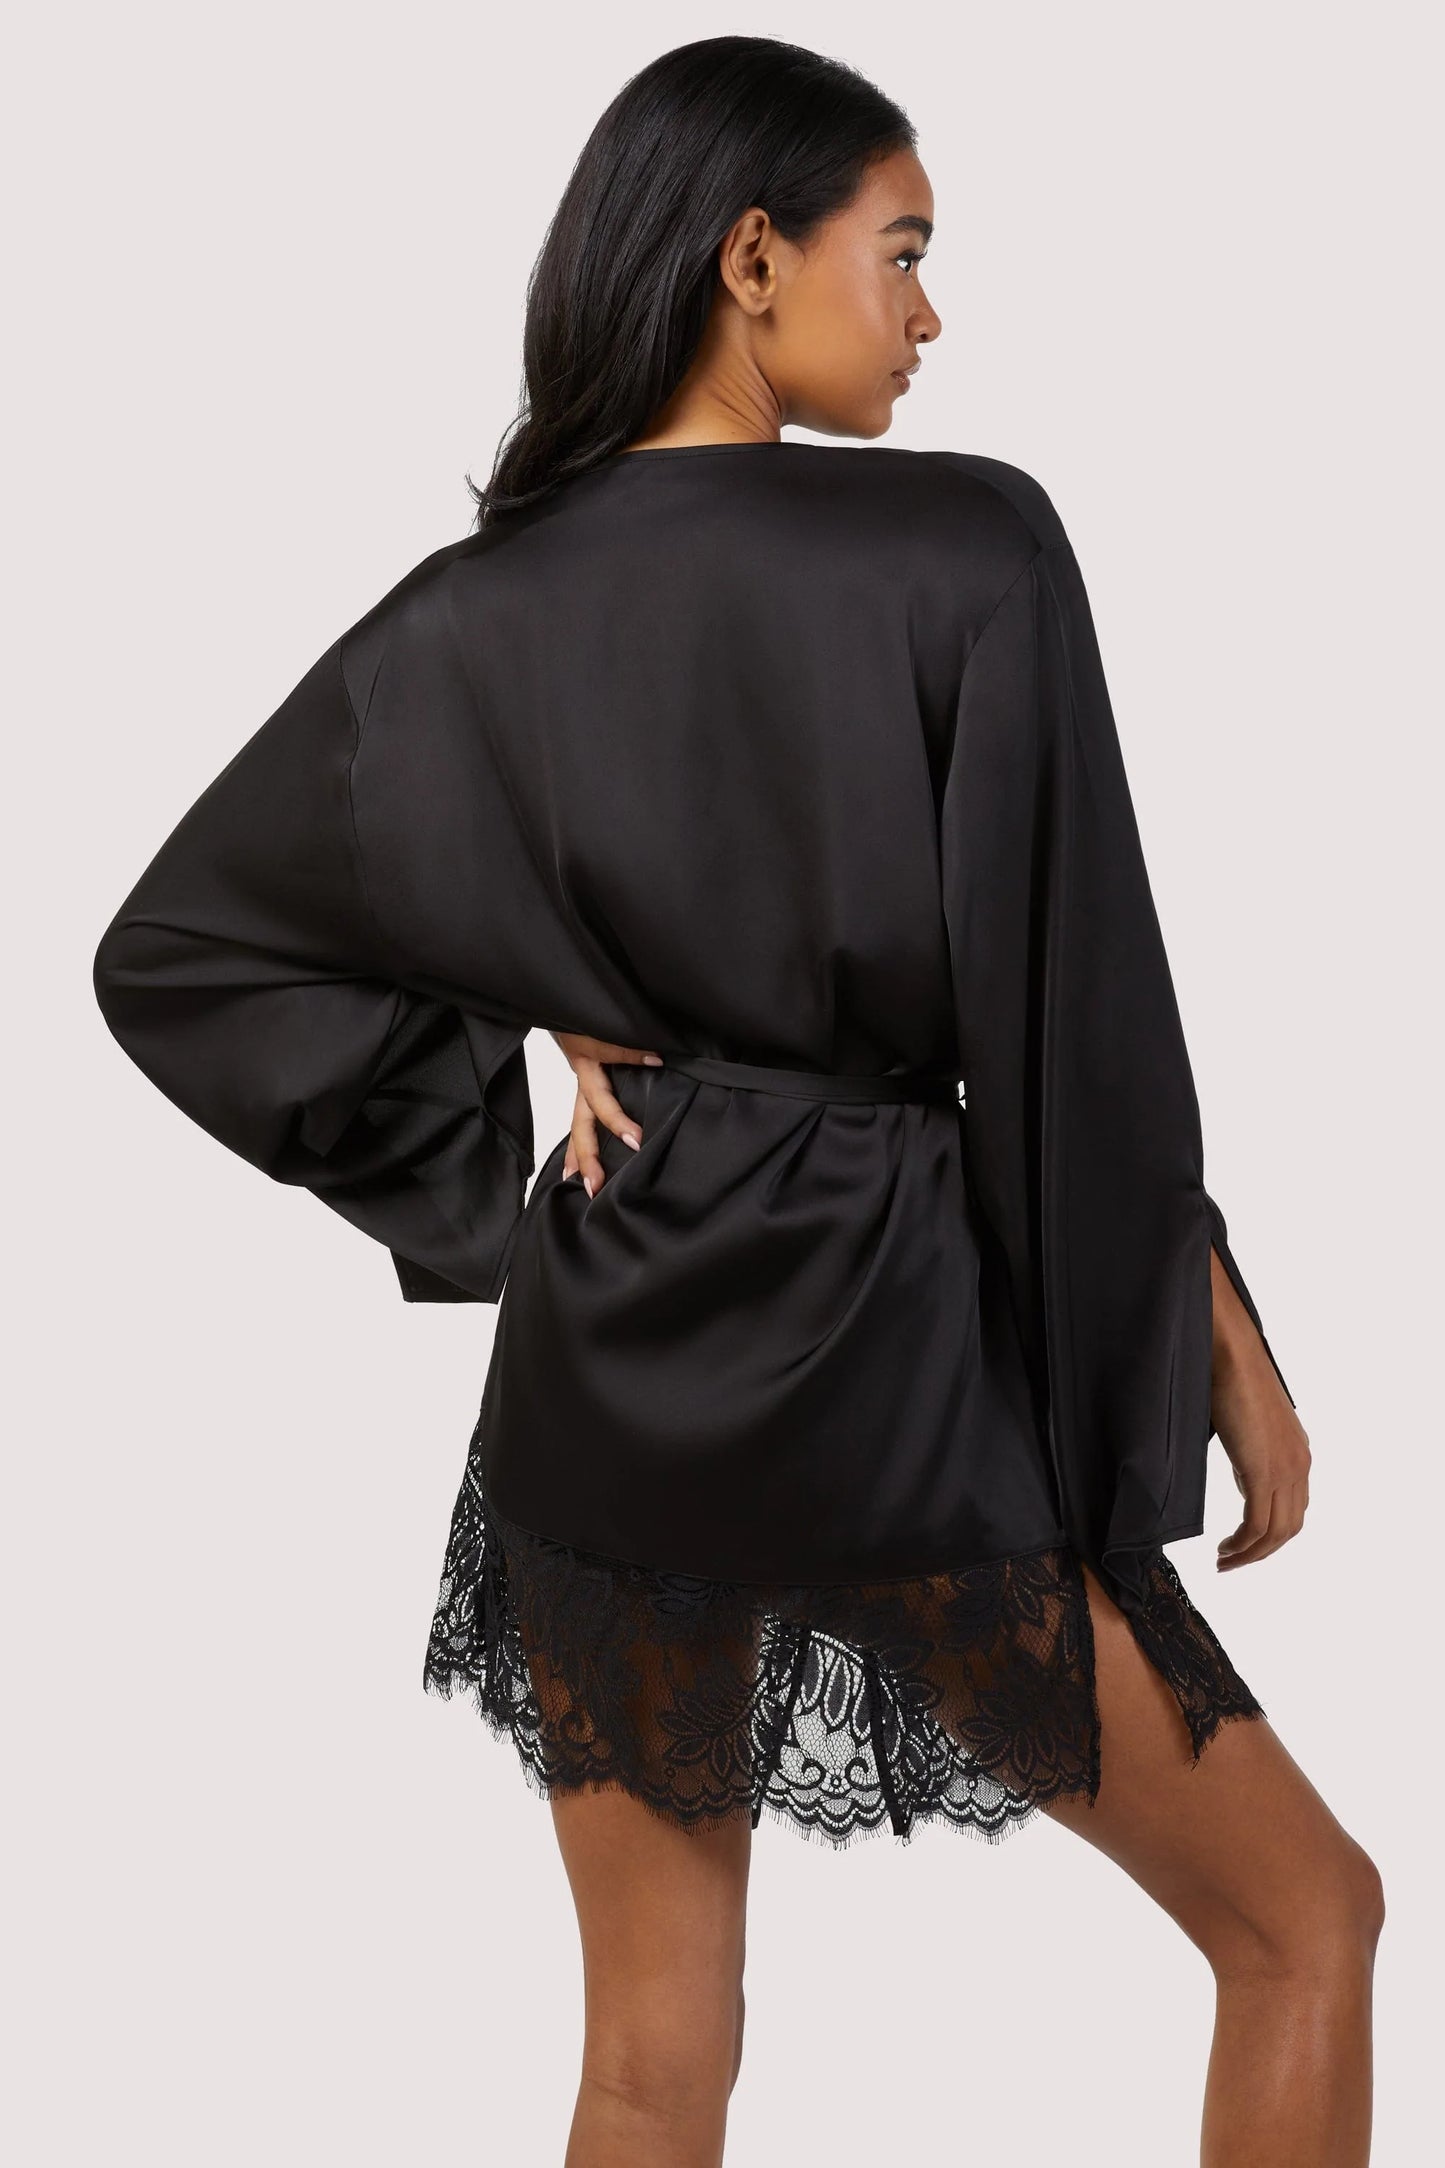 Rosie Satin and Lace Robe - Black